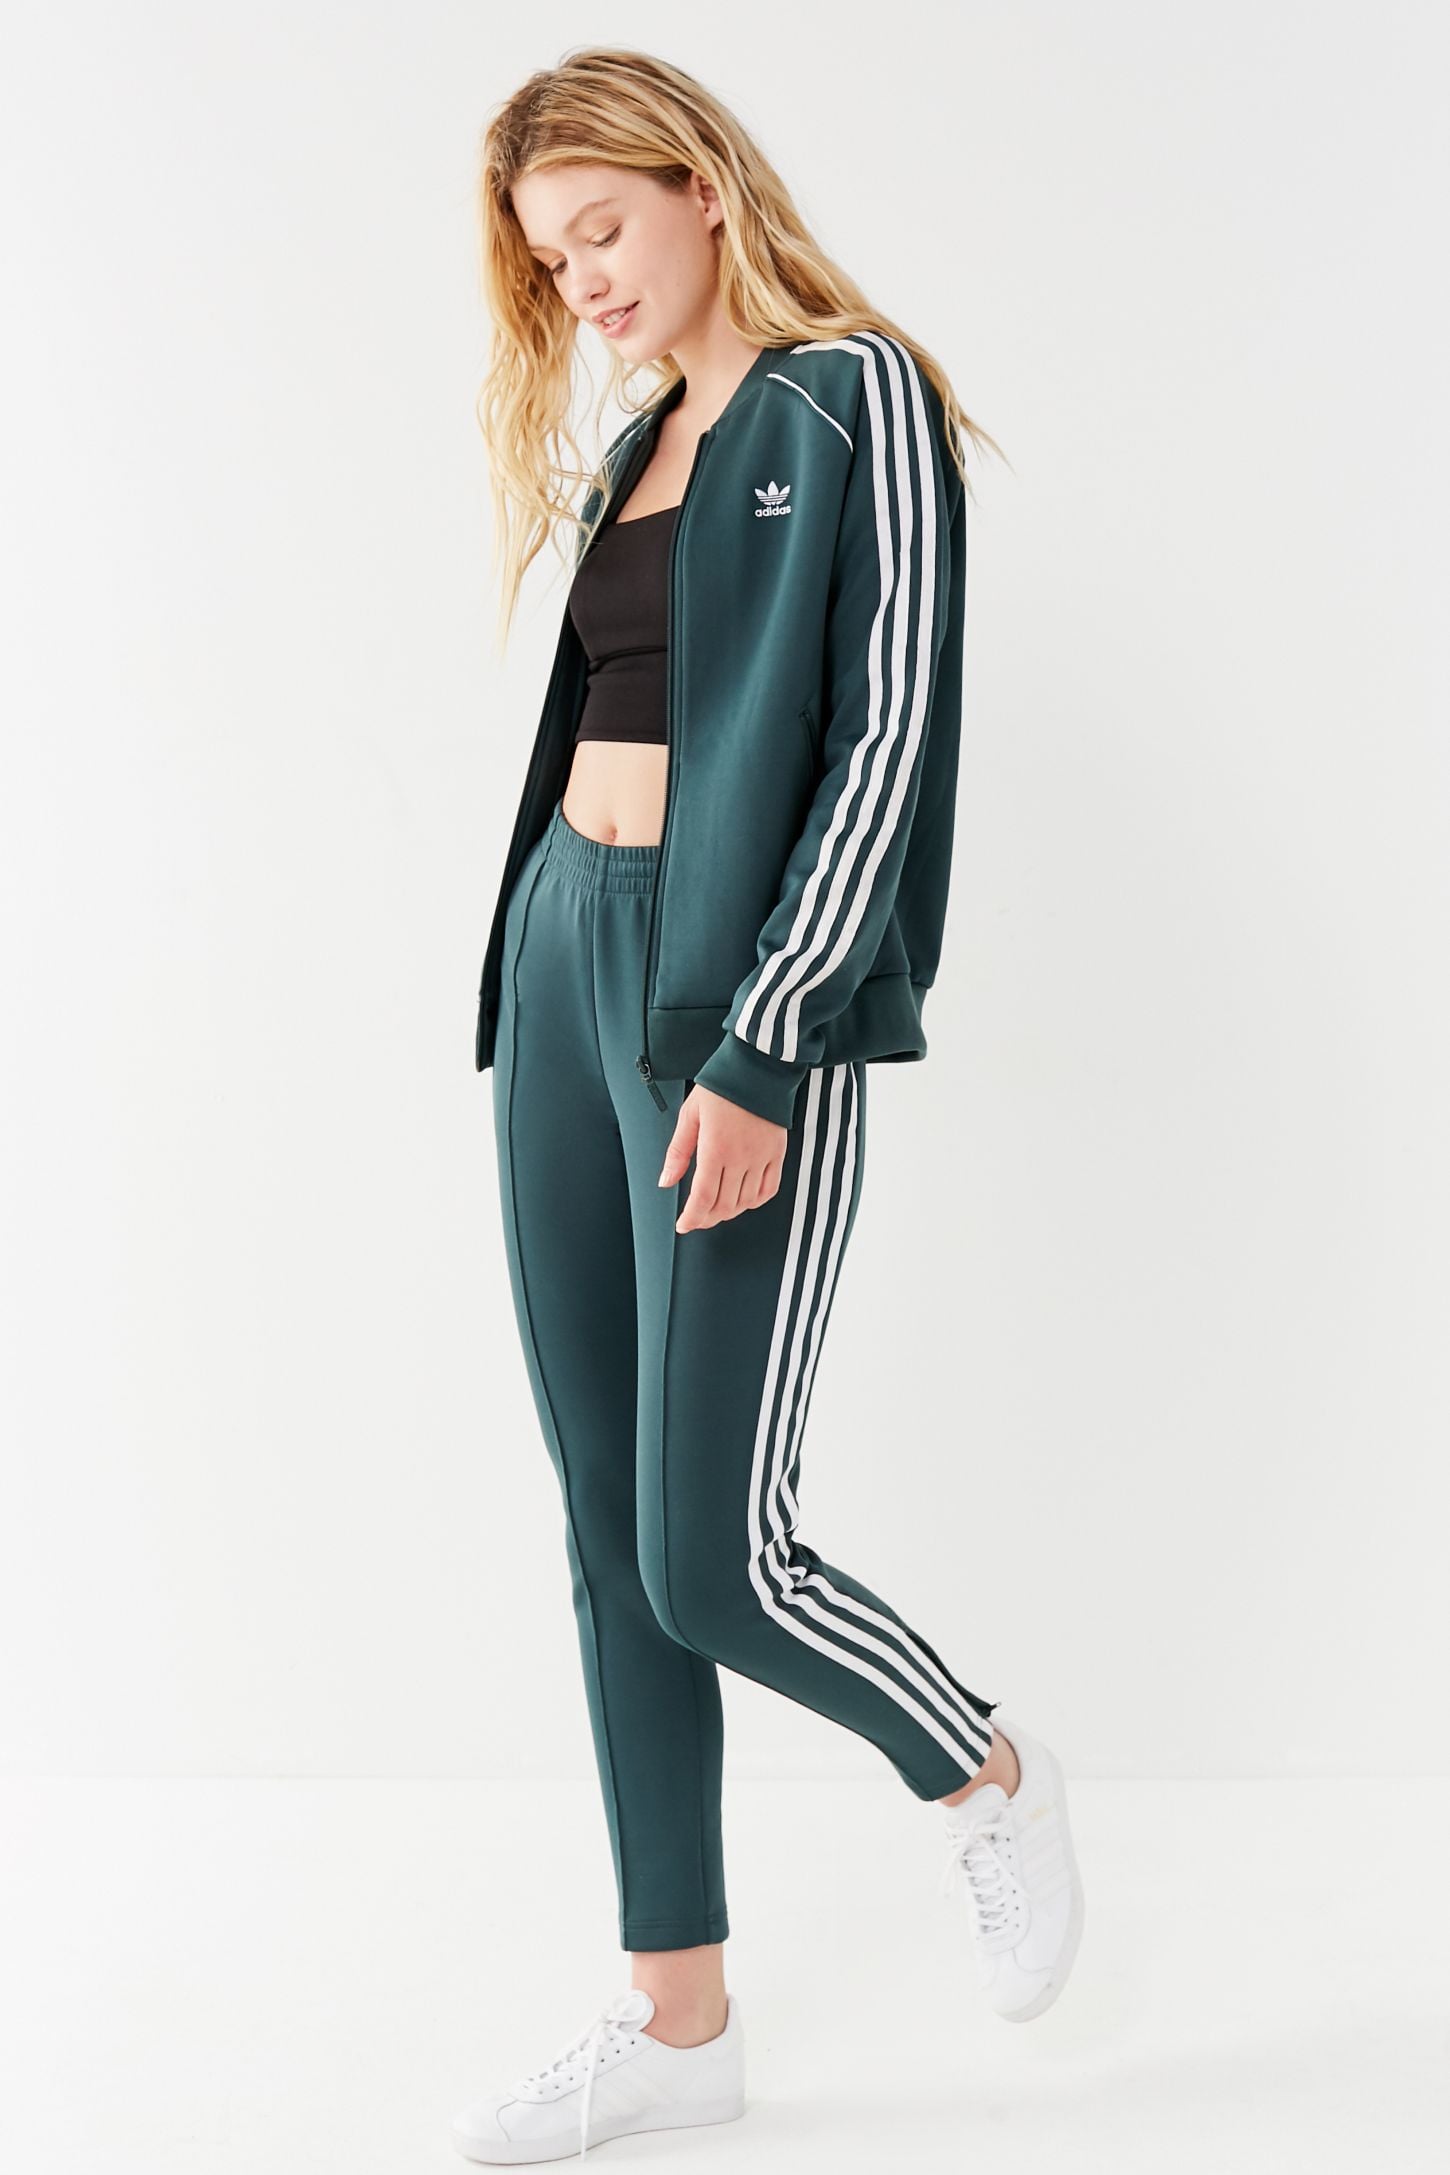 adidas track suits for woman